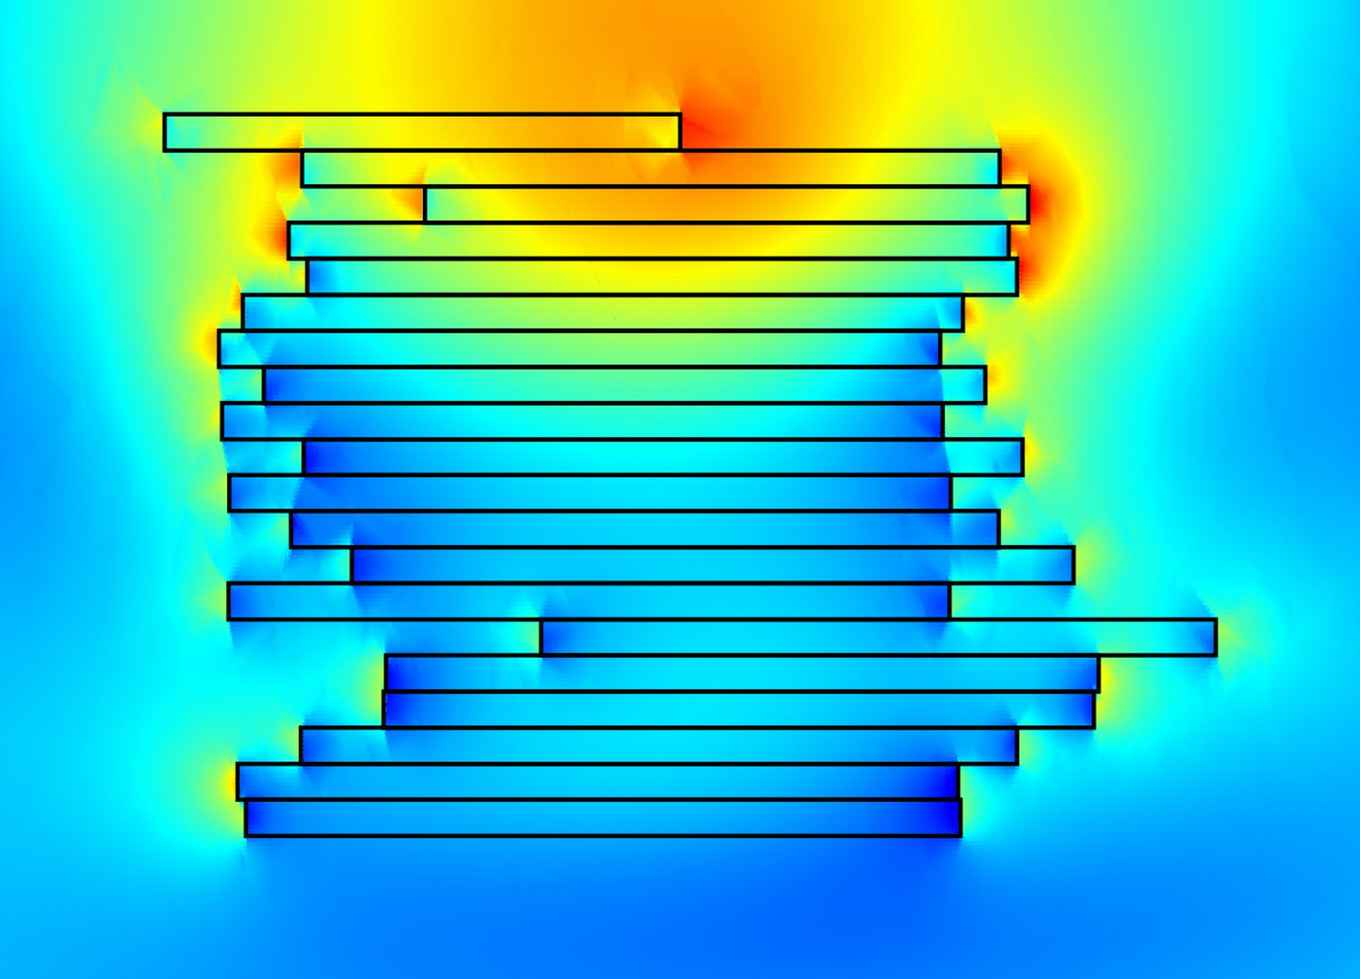 Light distribution in  small stacks of nanoscale layers